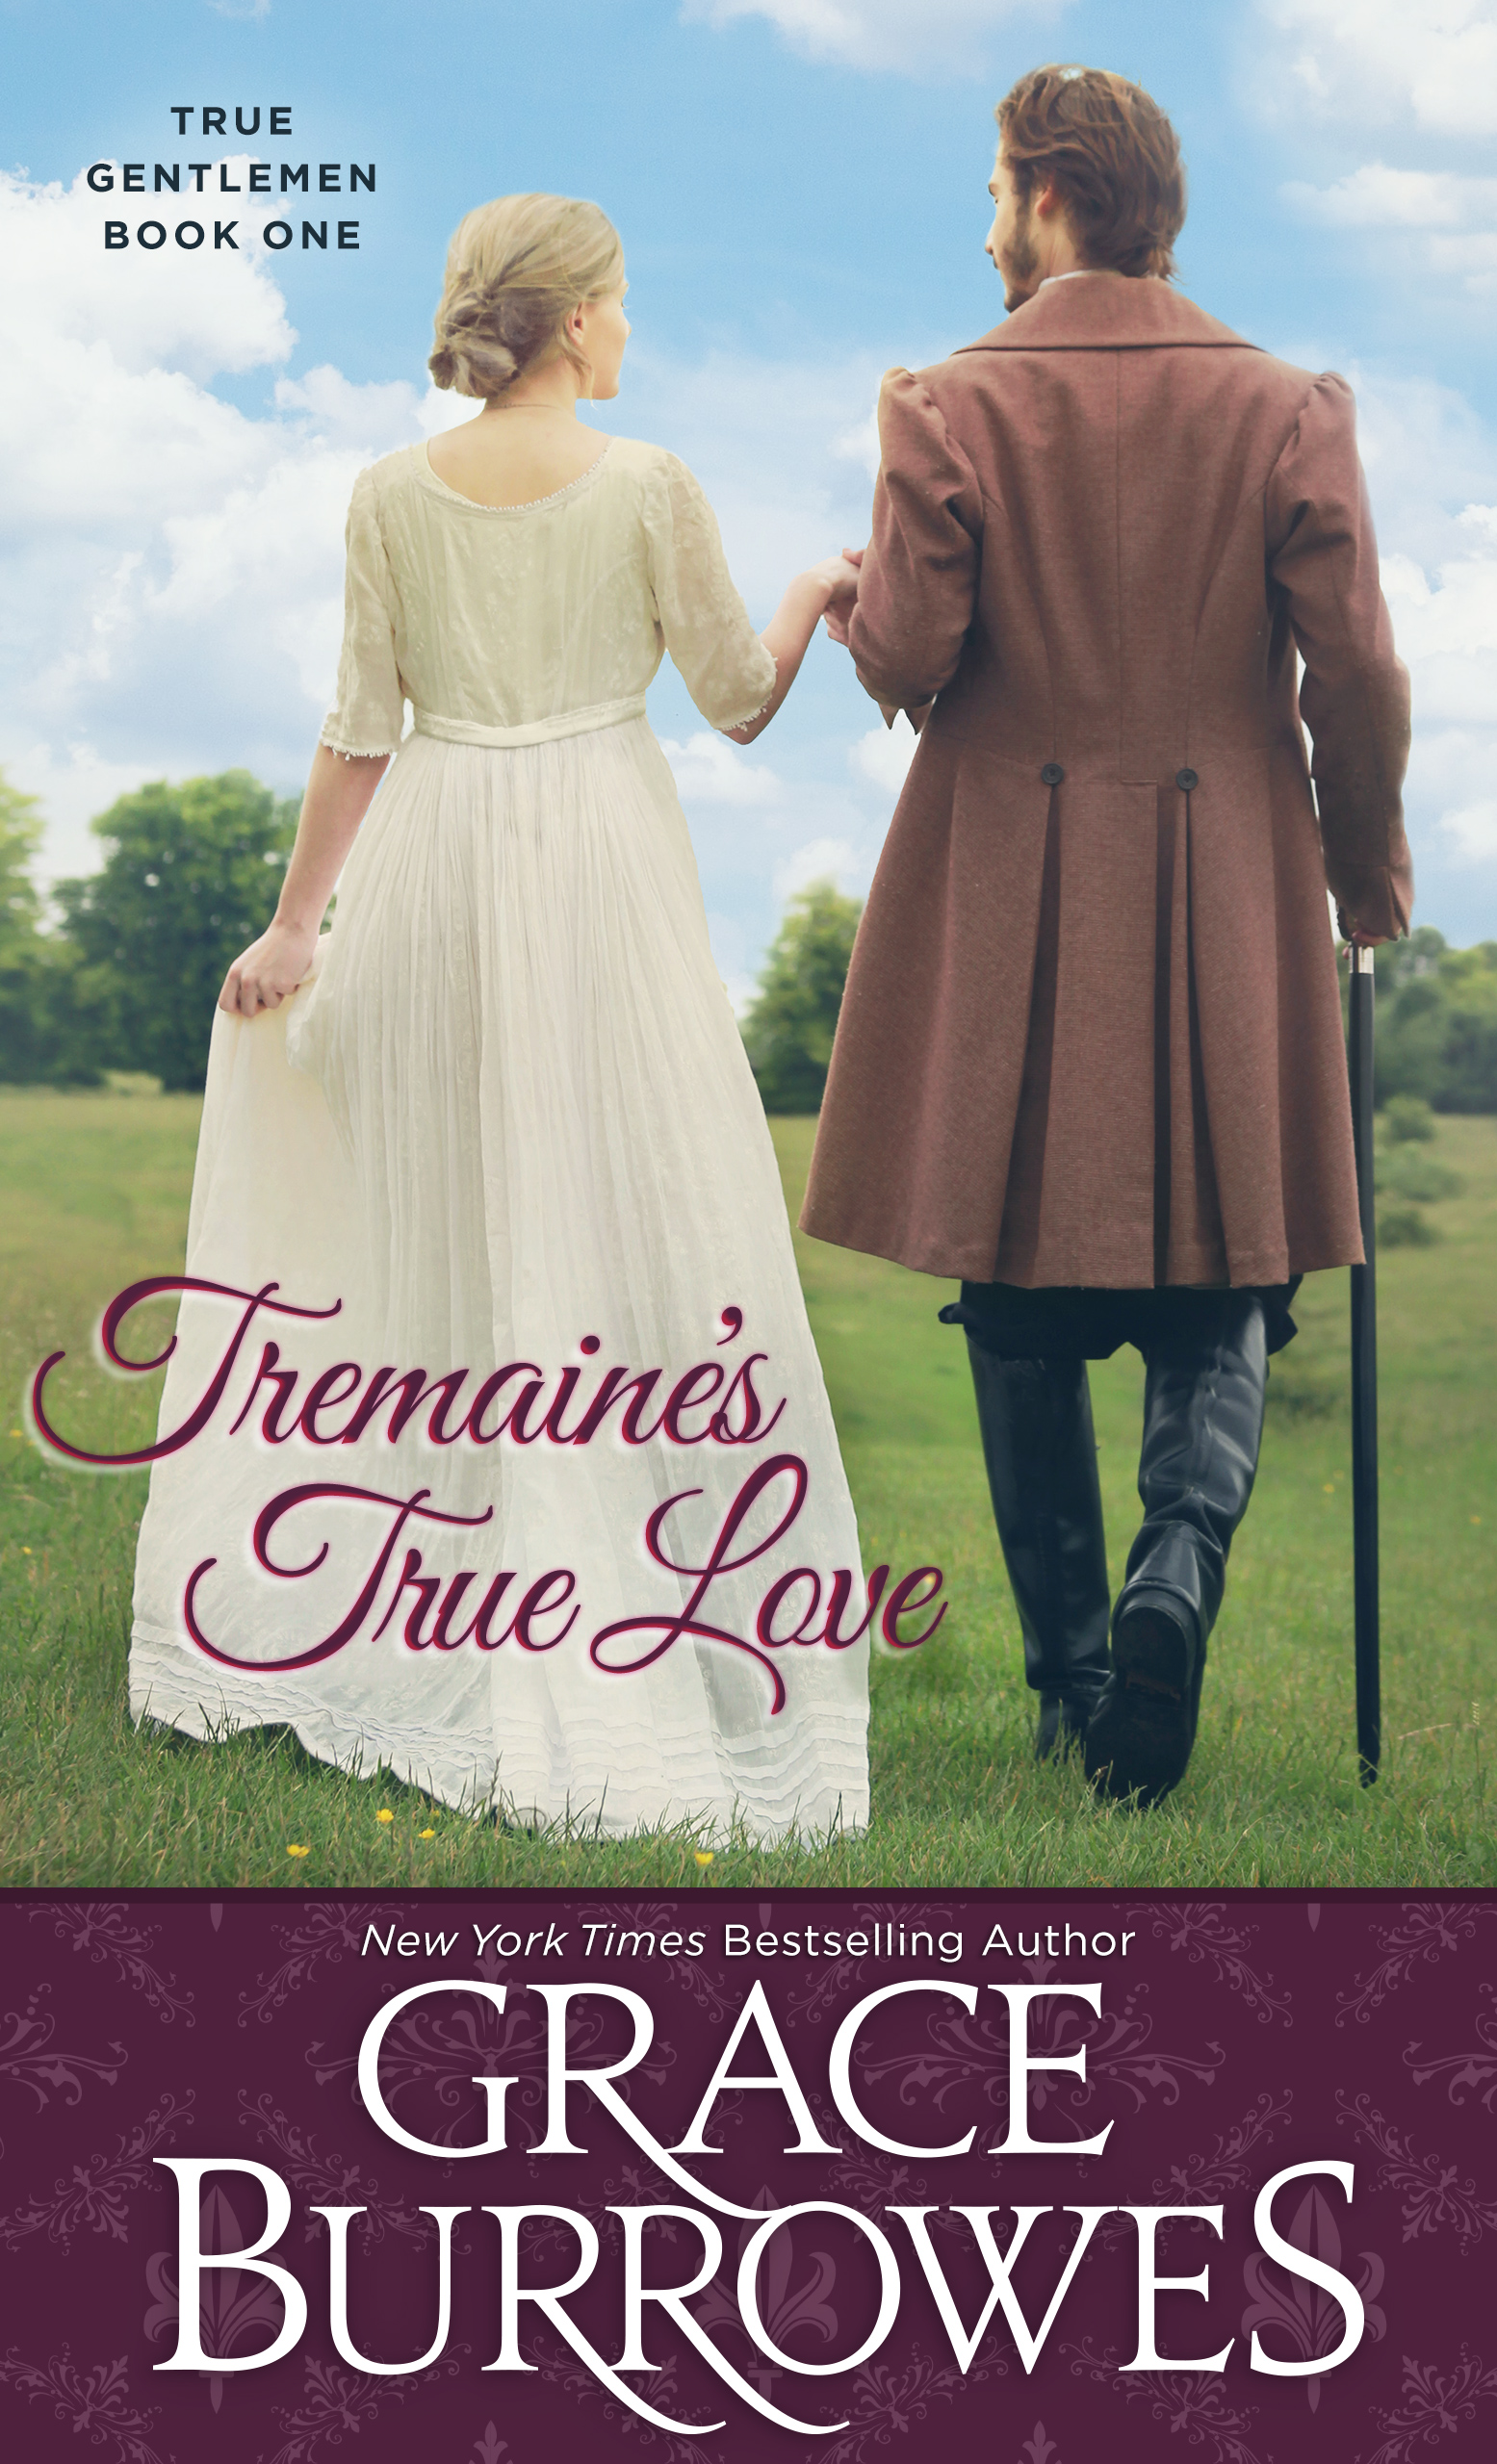 Tremaines True Love by Grace Burrowes